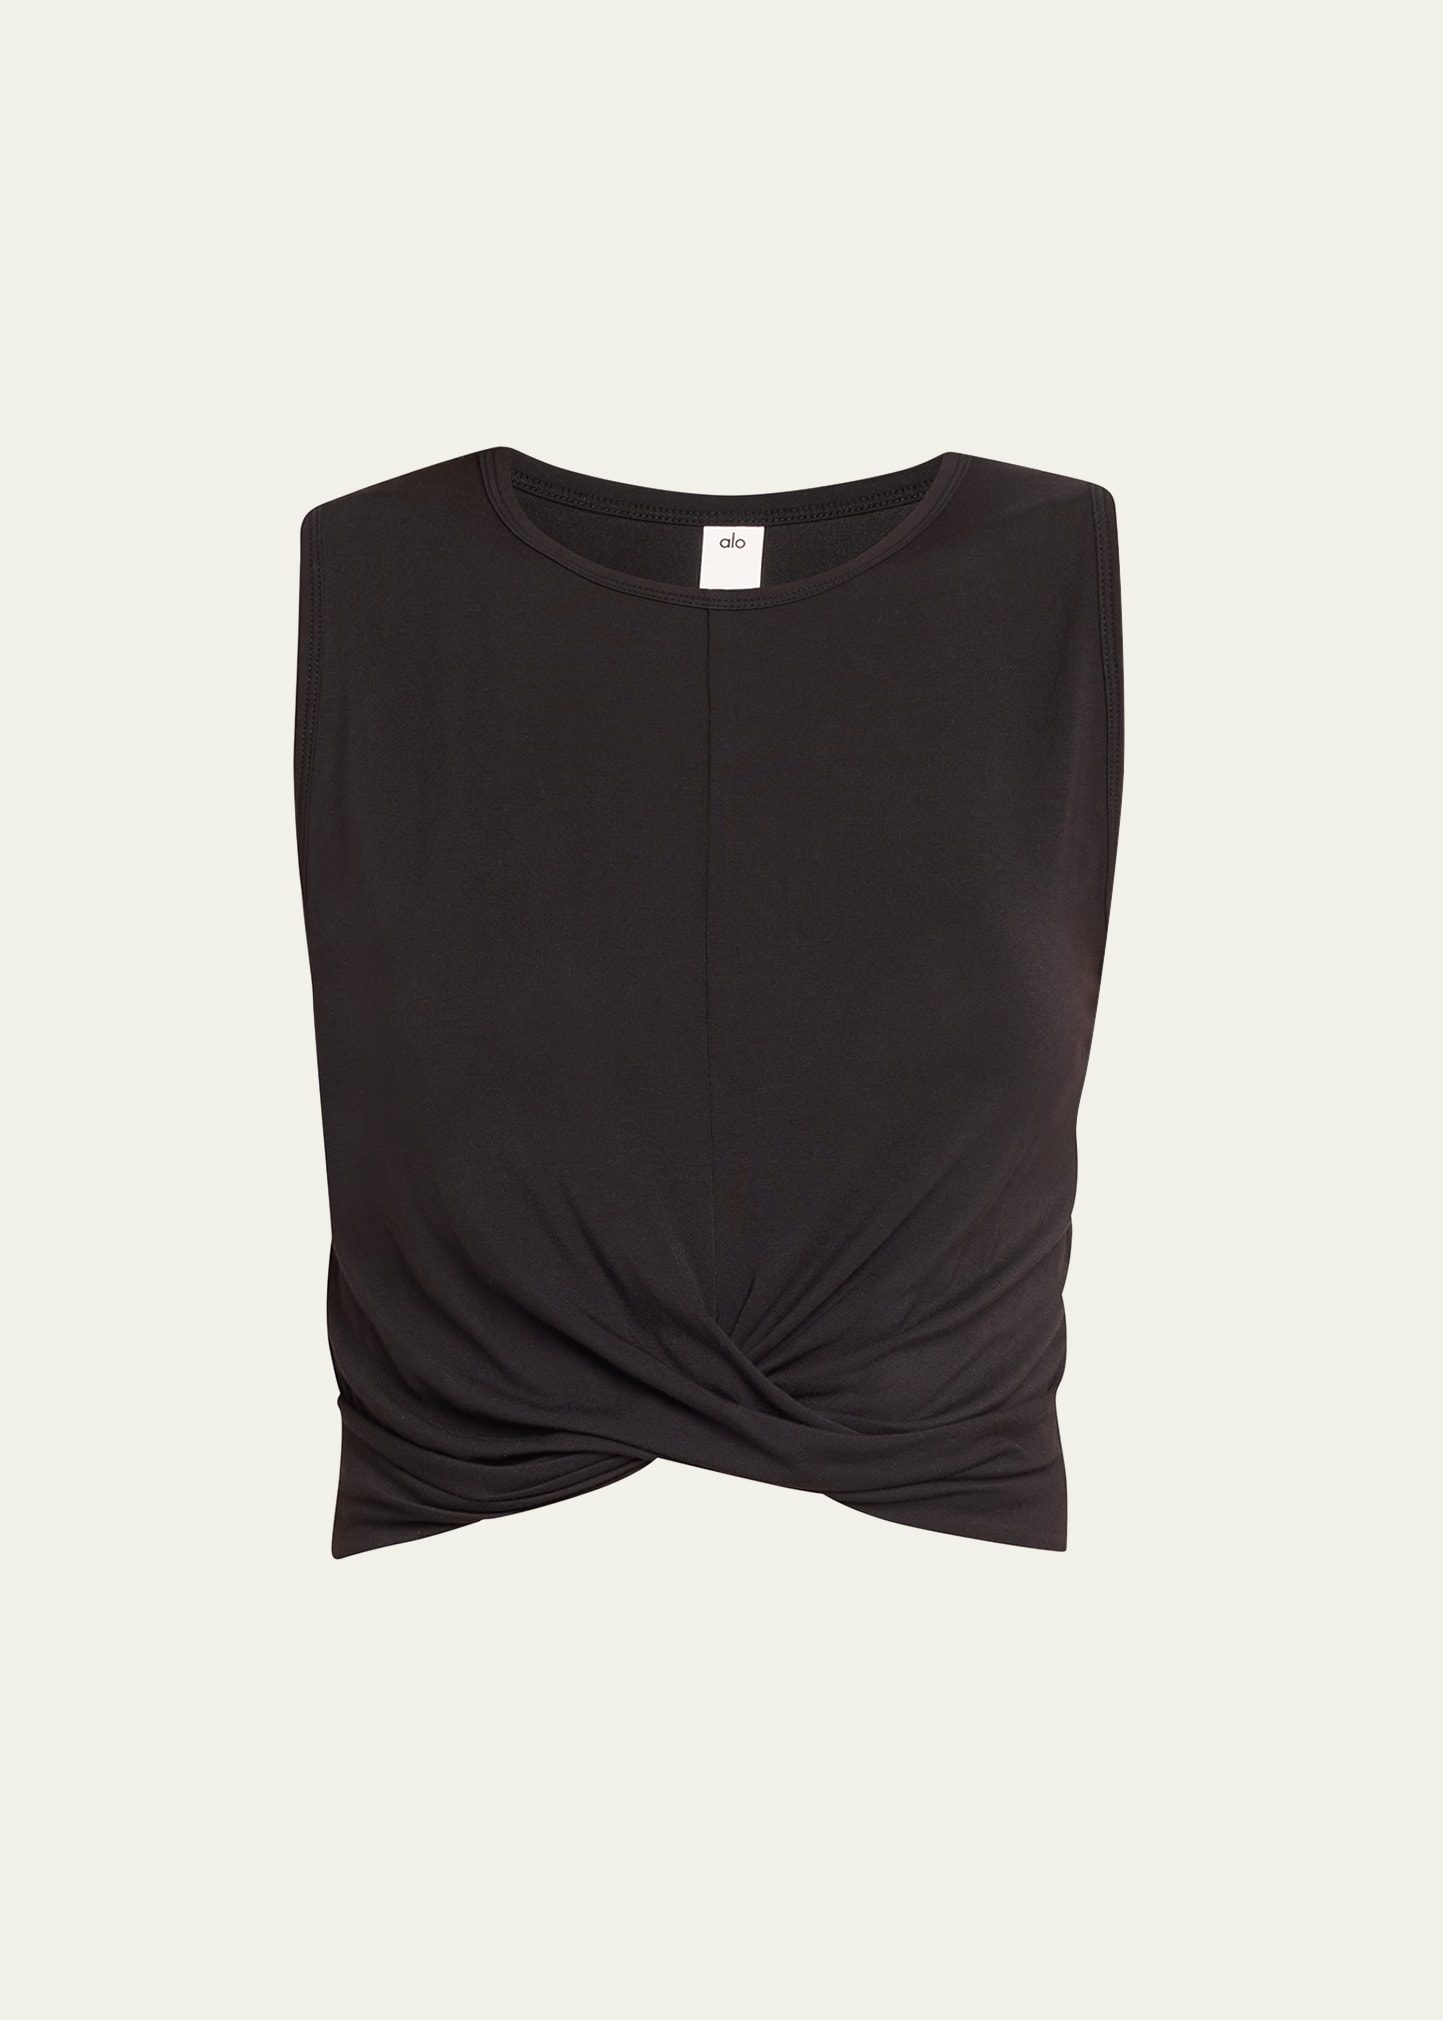 Cover Tank In Black by Alo Yoga at ORCHARD MILE